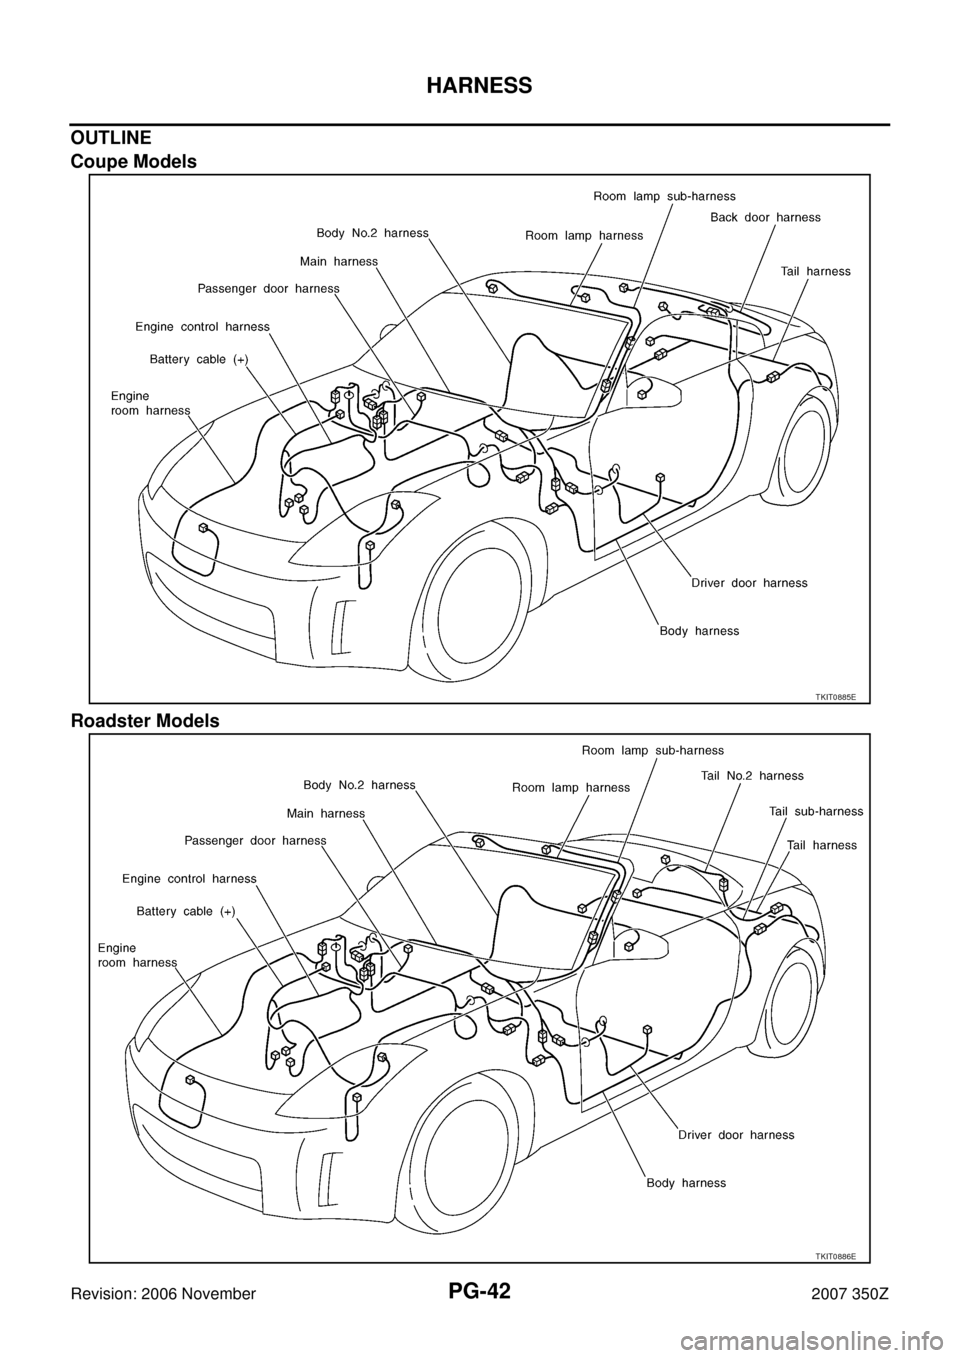 NISSAN 350Z 2007 Z33 Power Supply, Ground And Circuit Service Manual PG-42
HARNESS
Revision: 2006 November2007 350Z
OUTLINE
Coupe Models
Roadster Models
TKIT0885E
TKIT0886E 